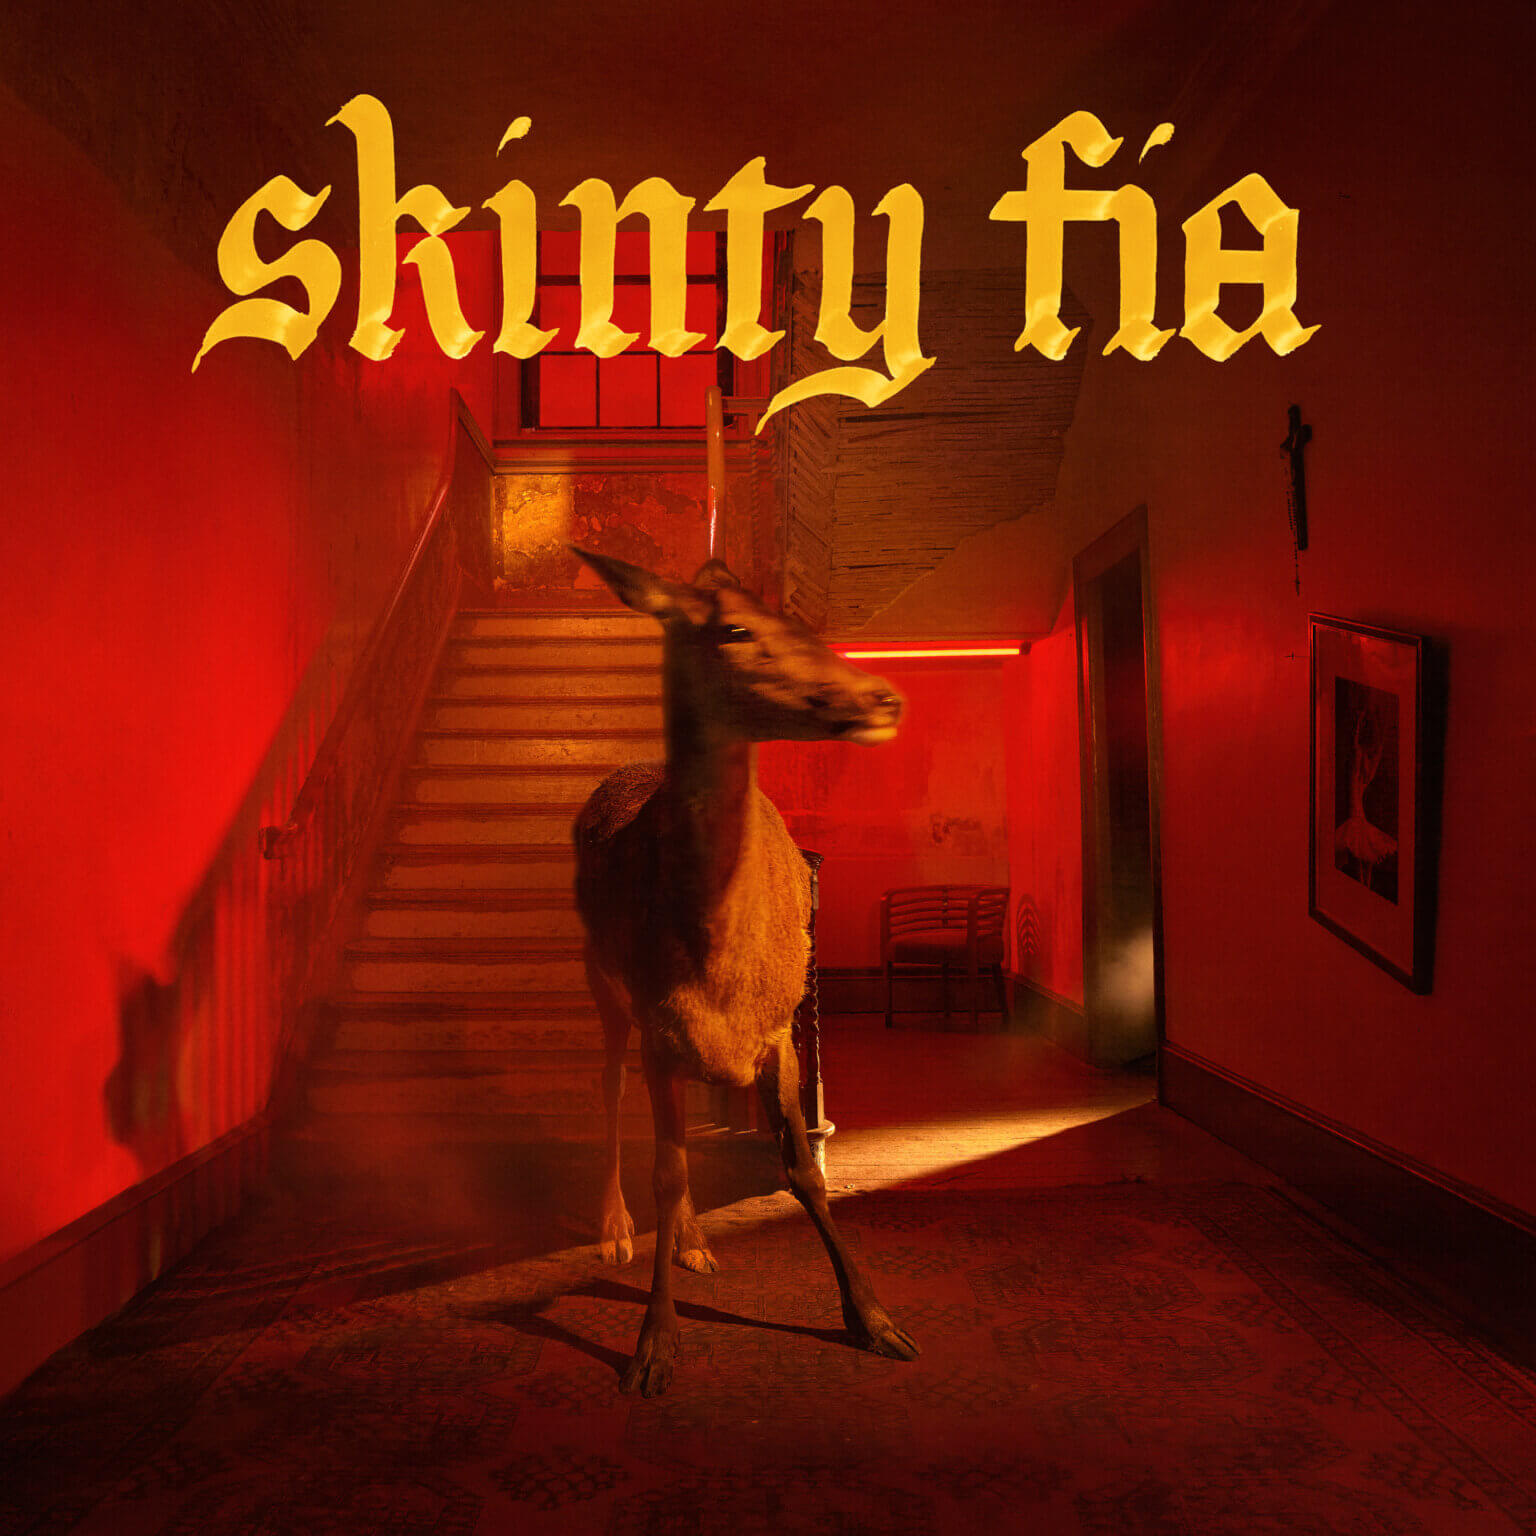 Fontaines D.C. have announced Skinty Fia, their new full-length album, will drop on April 22, 2022 via Partisan Records